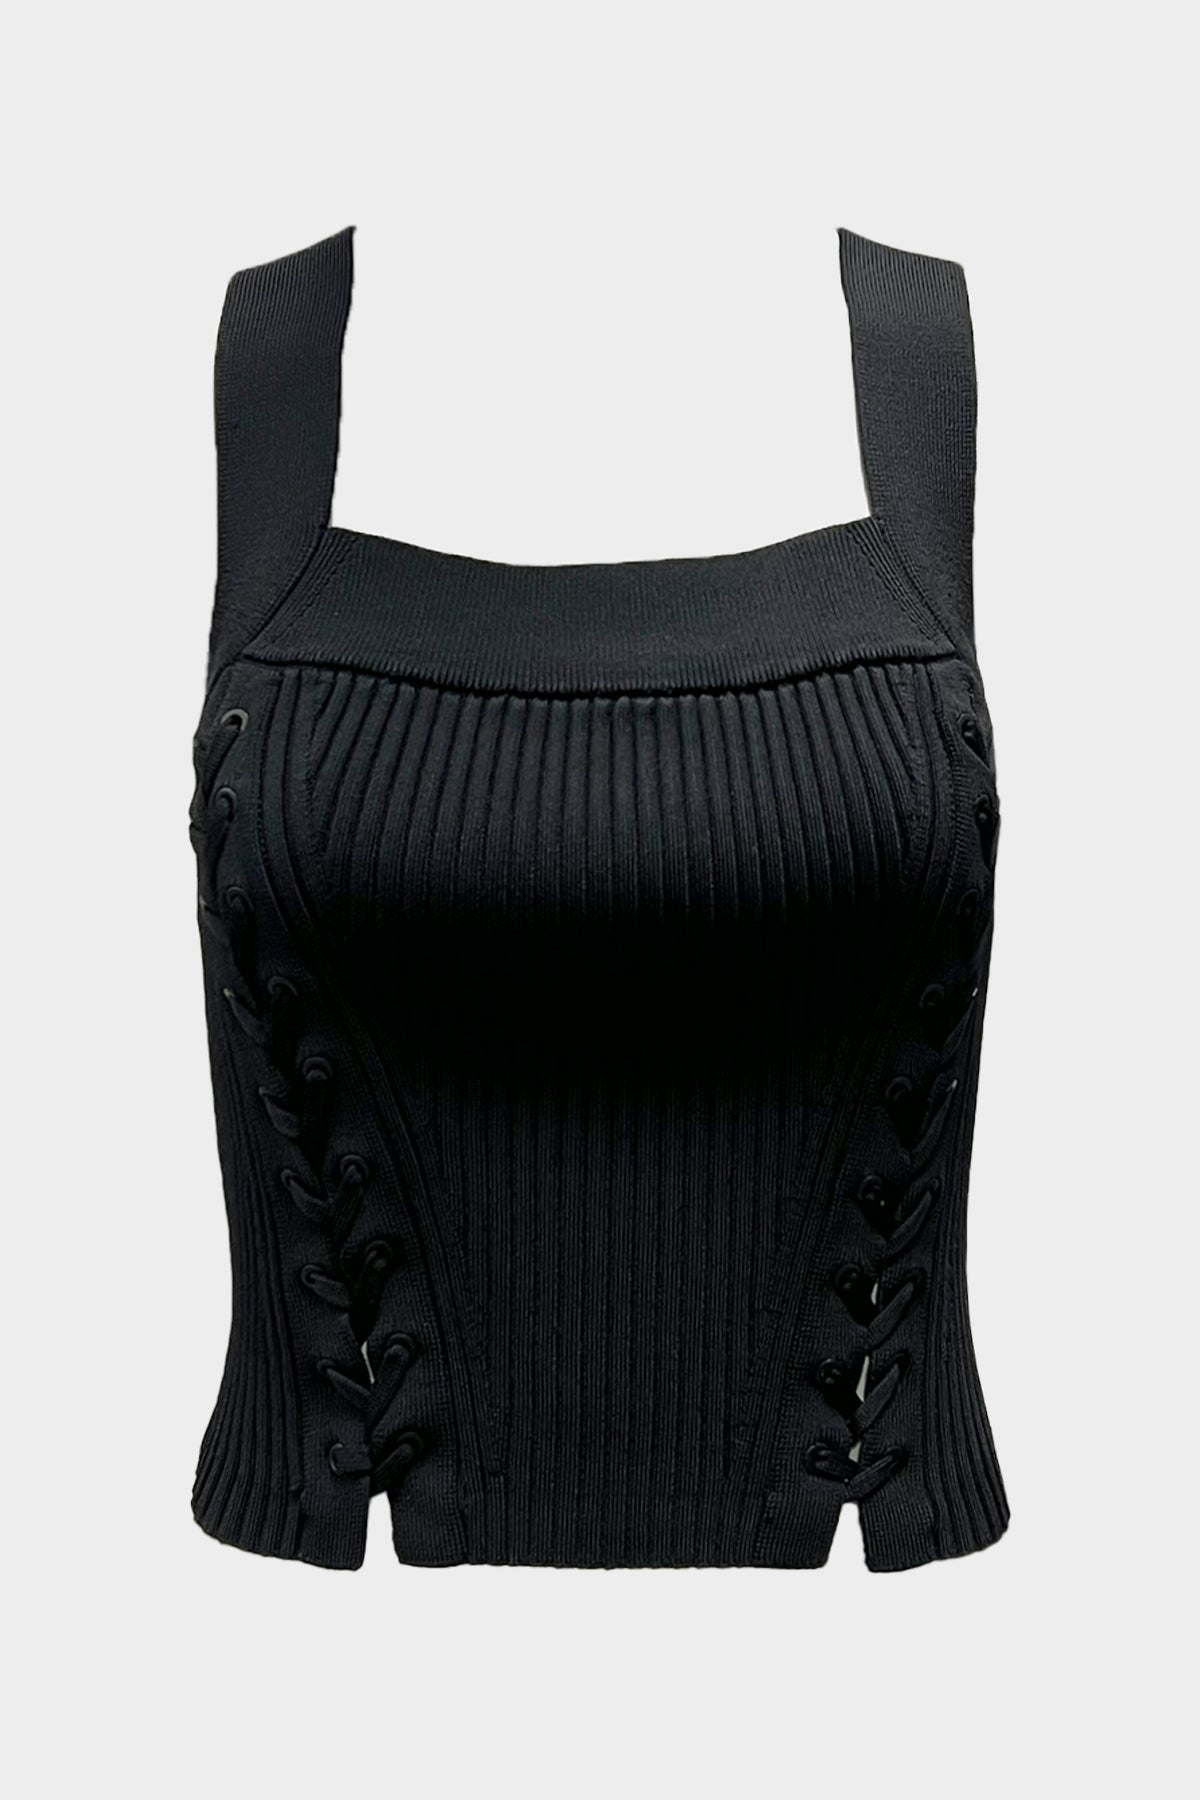 Nelly Lace Up Tank in Black - shop-olivia.com